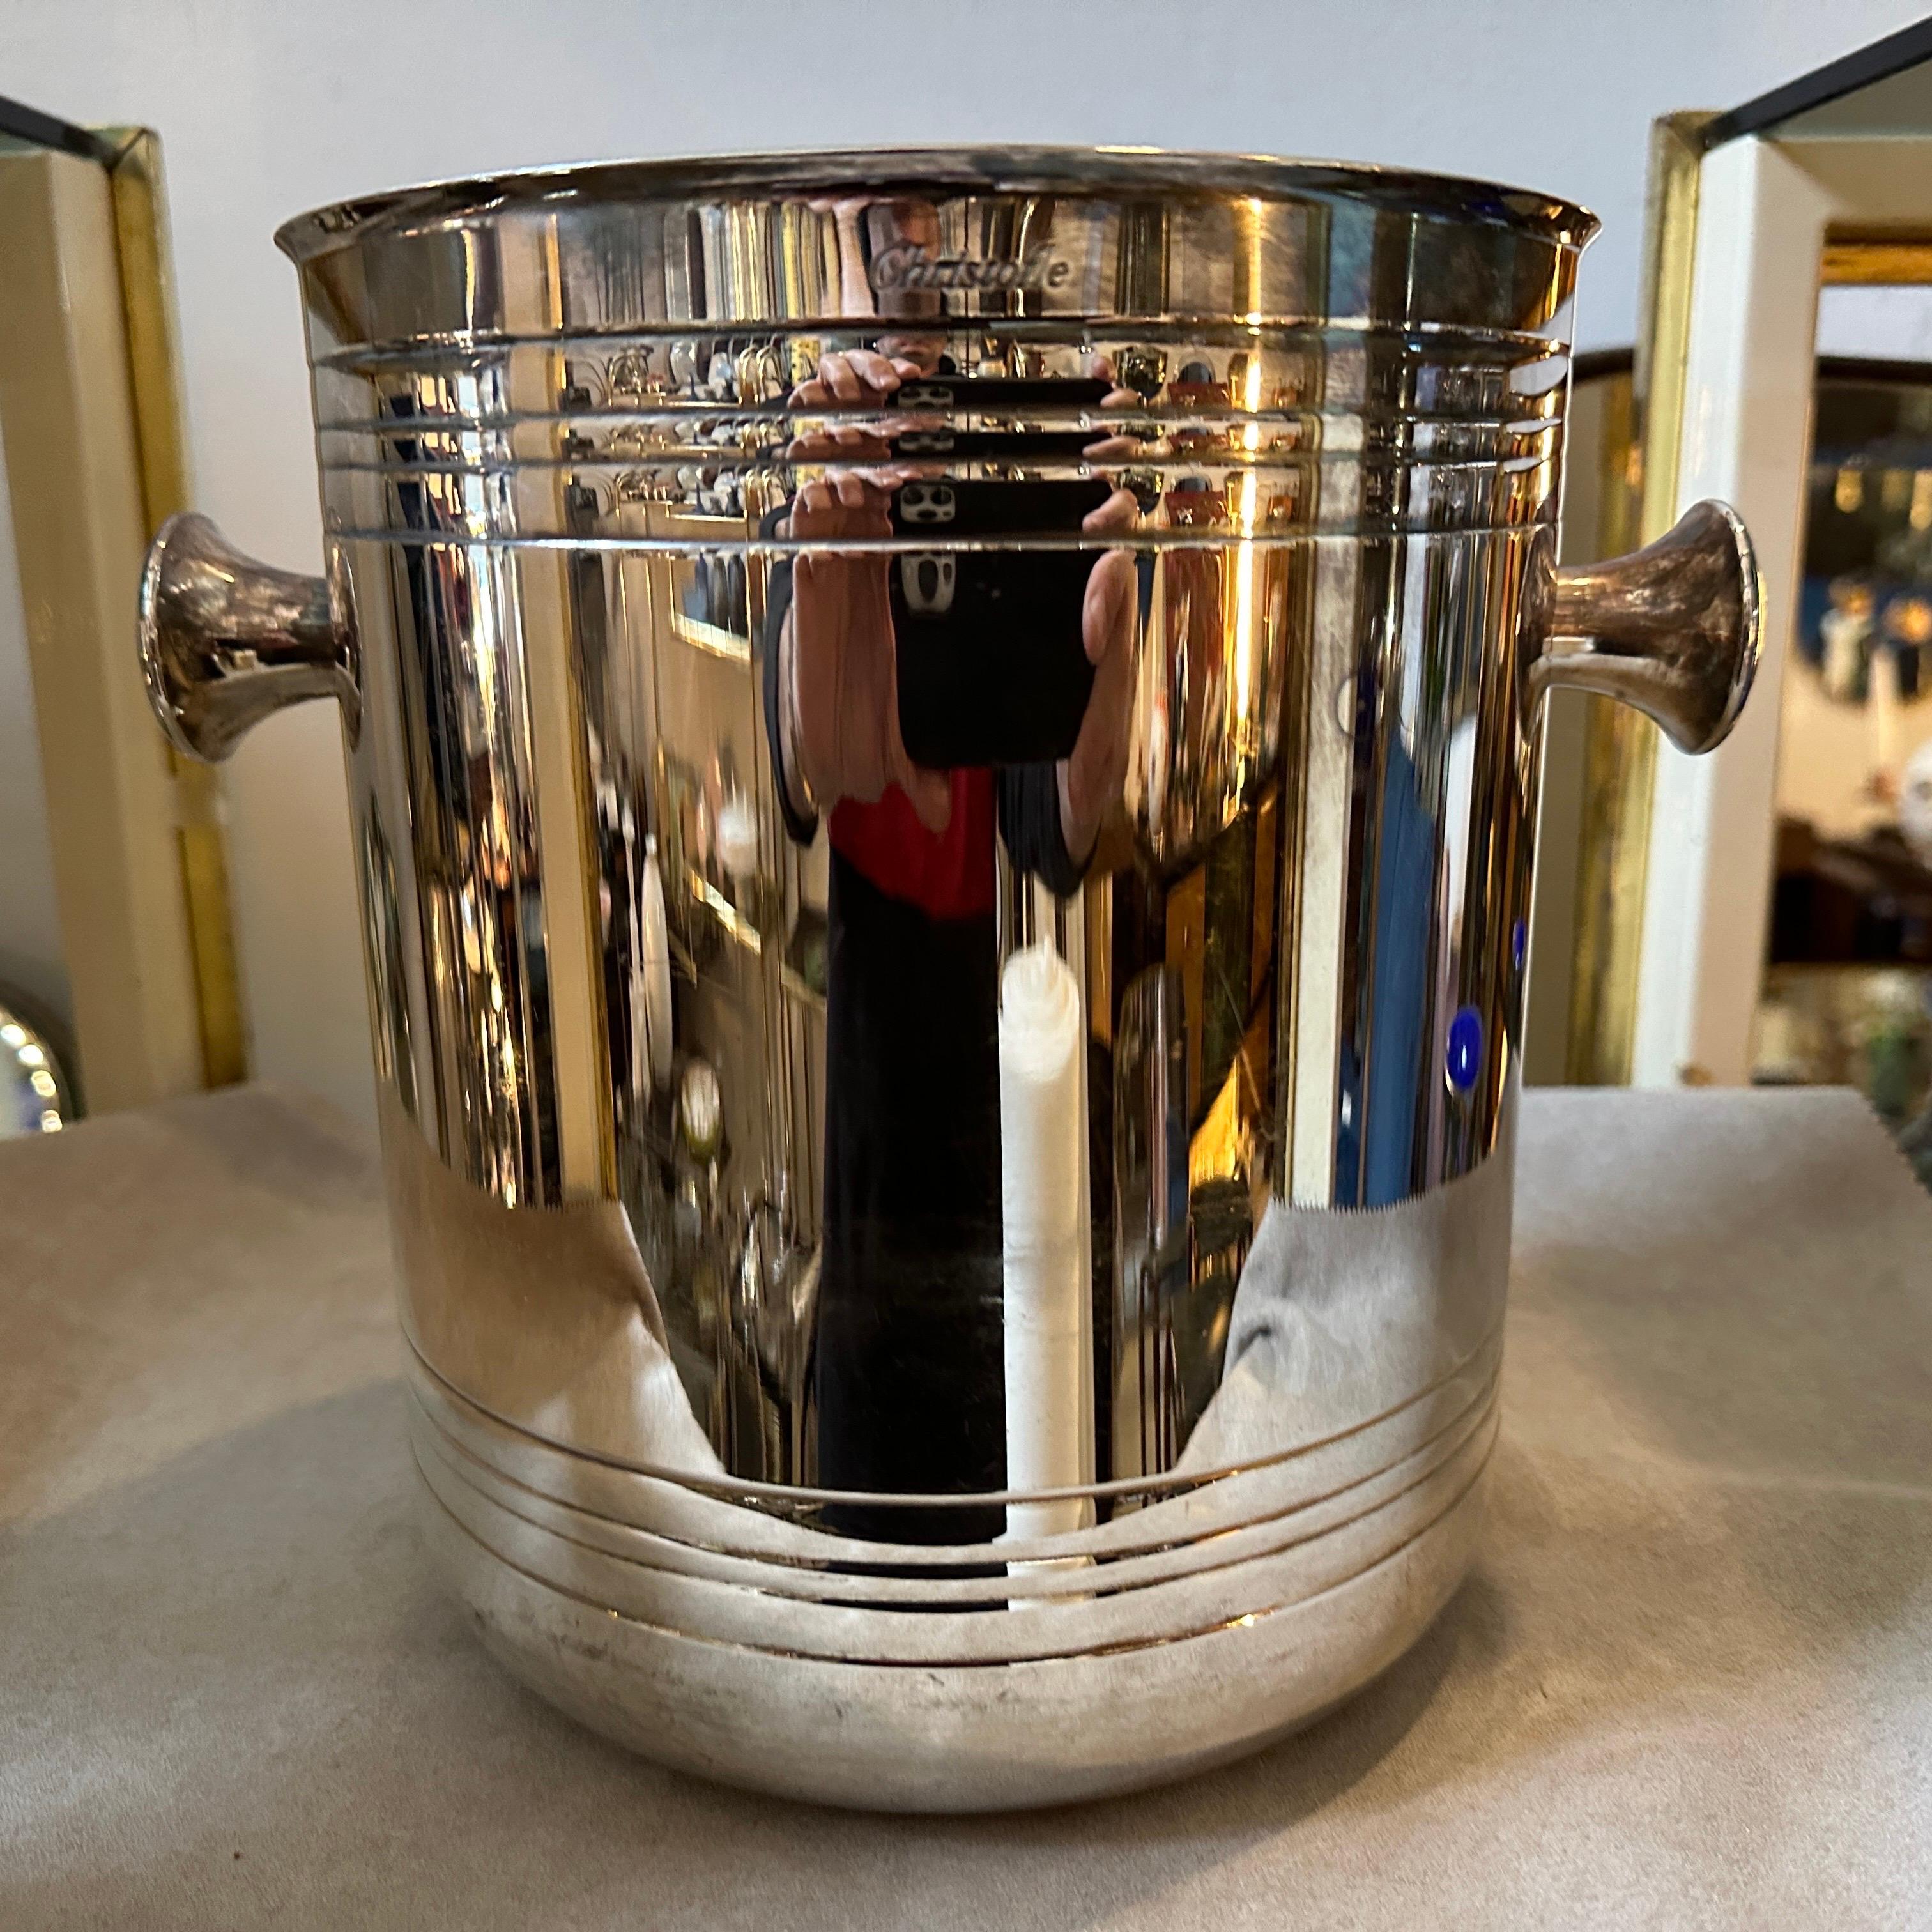 This French Wine Cooler by Christofle is a sleek and elegant piece of barware, reflecting the minimalist and contemporary design trends of the era. It has been crafted from high-quality silver-plated metal. Silver plating provides a luxurious finish